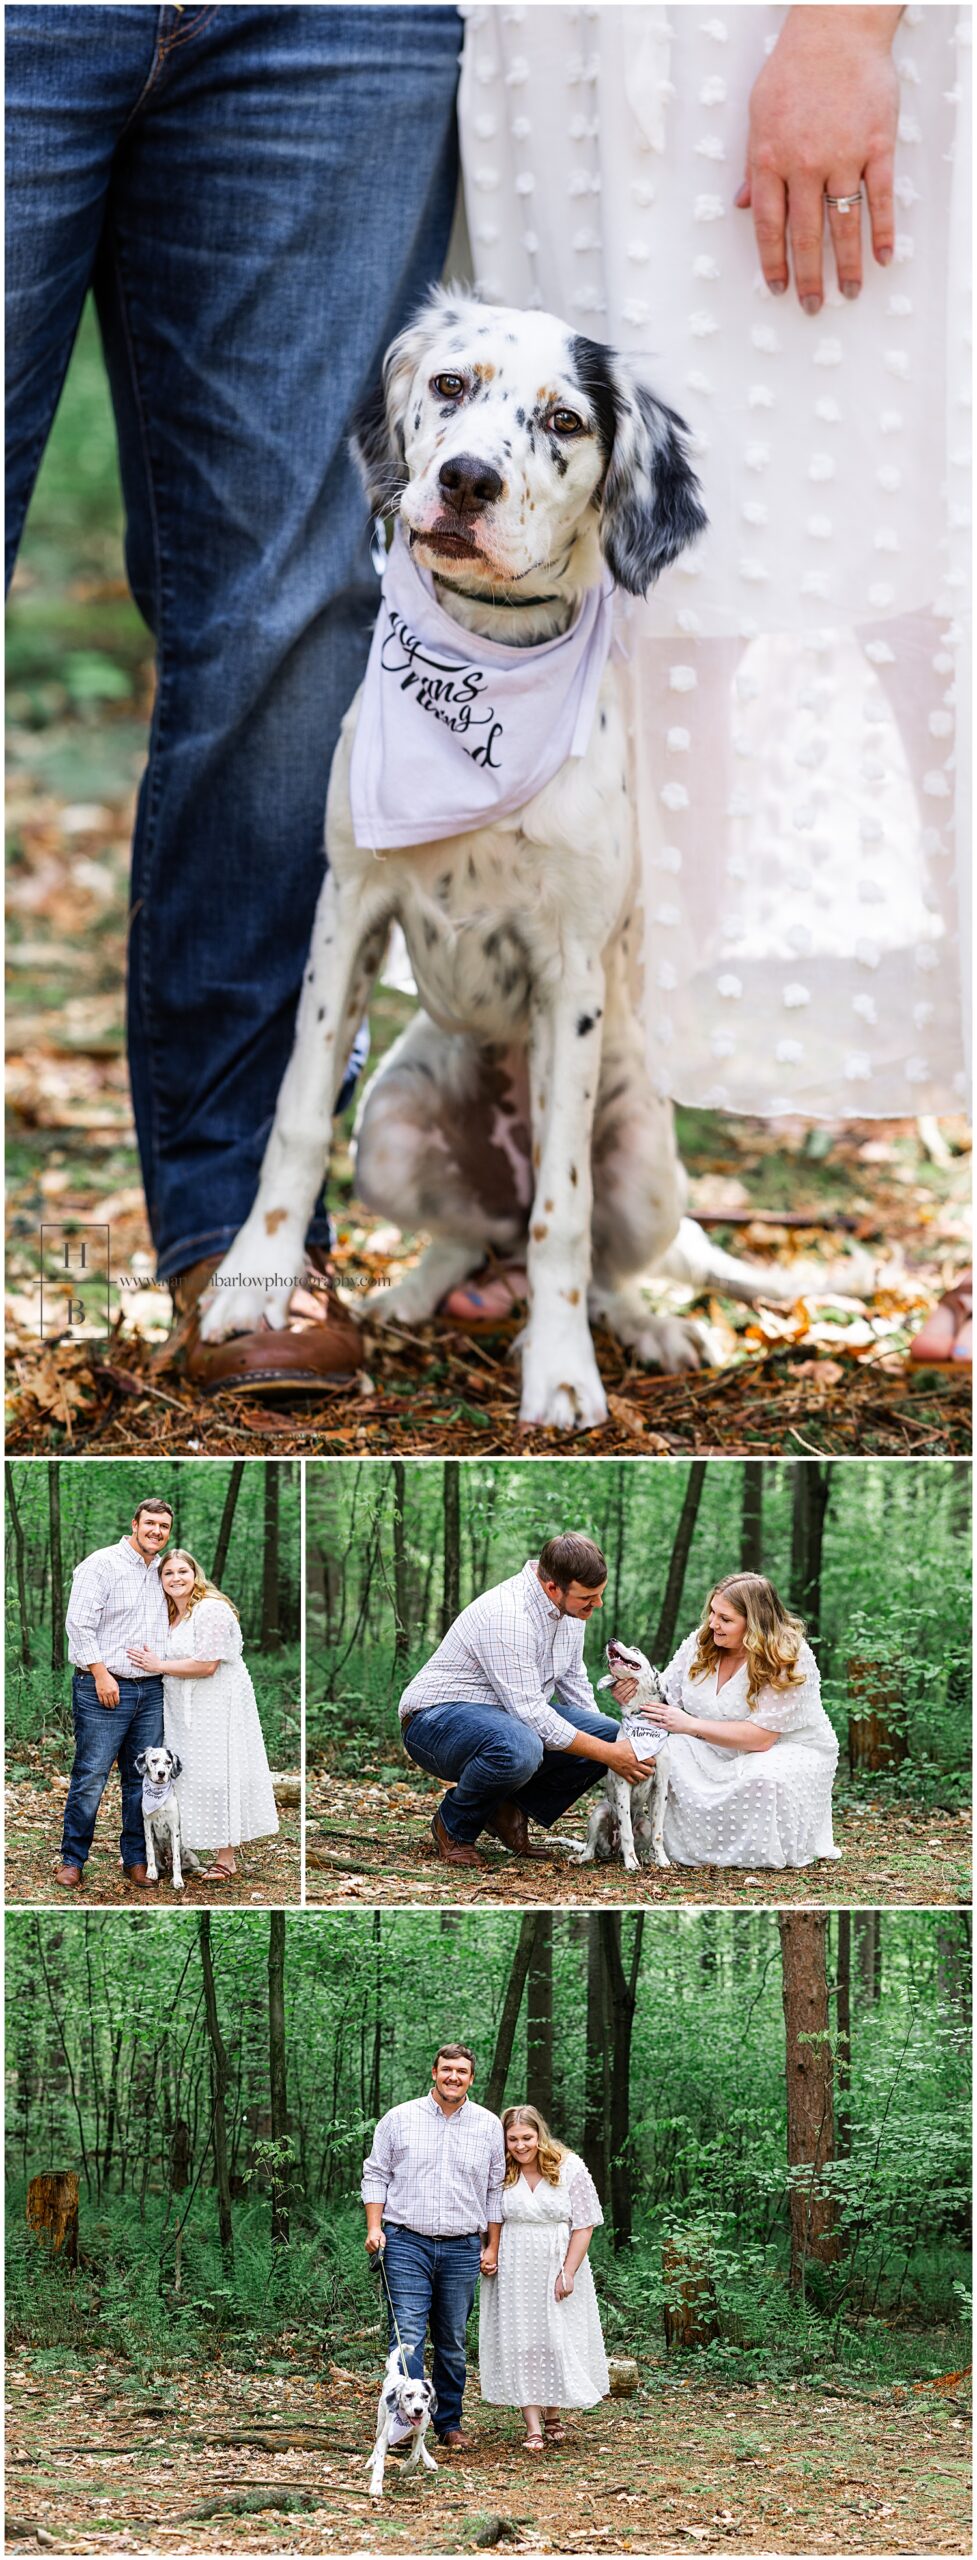 Couple poses with dog wearing handkerchief for engagement photos.